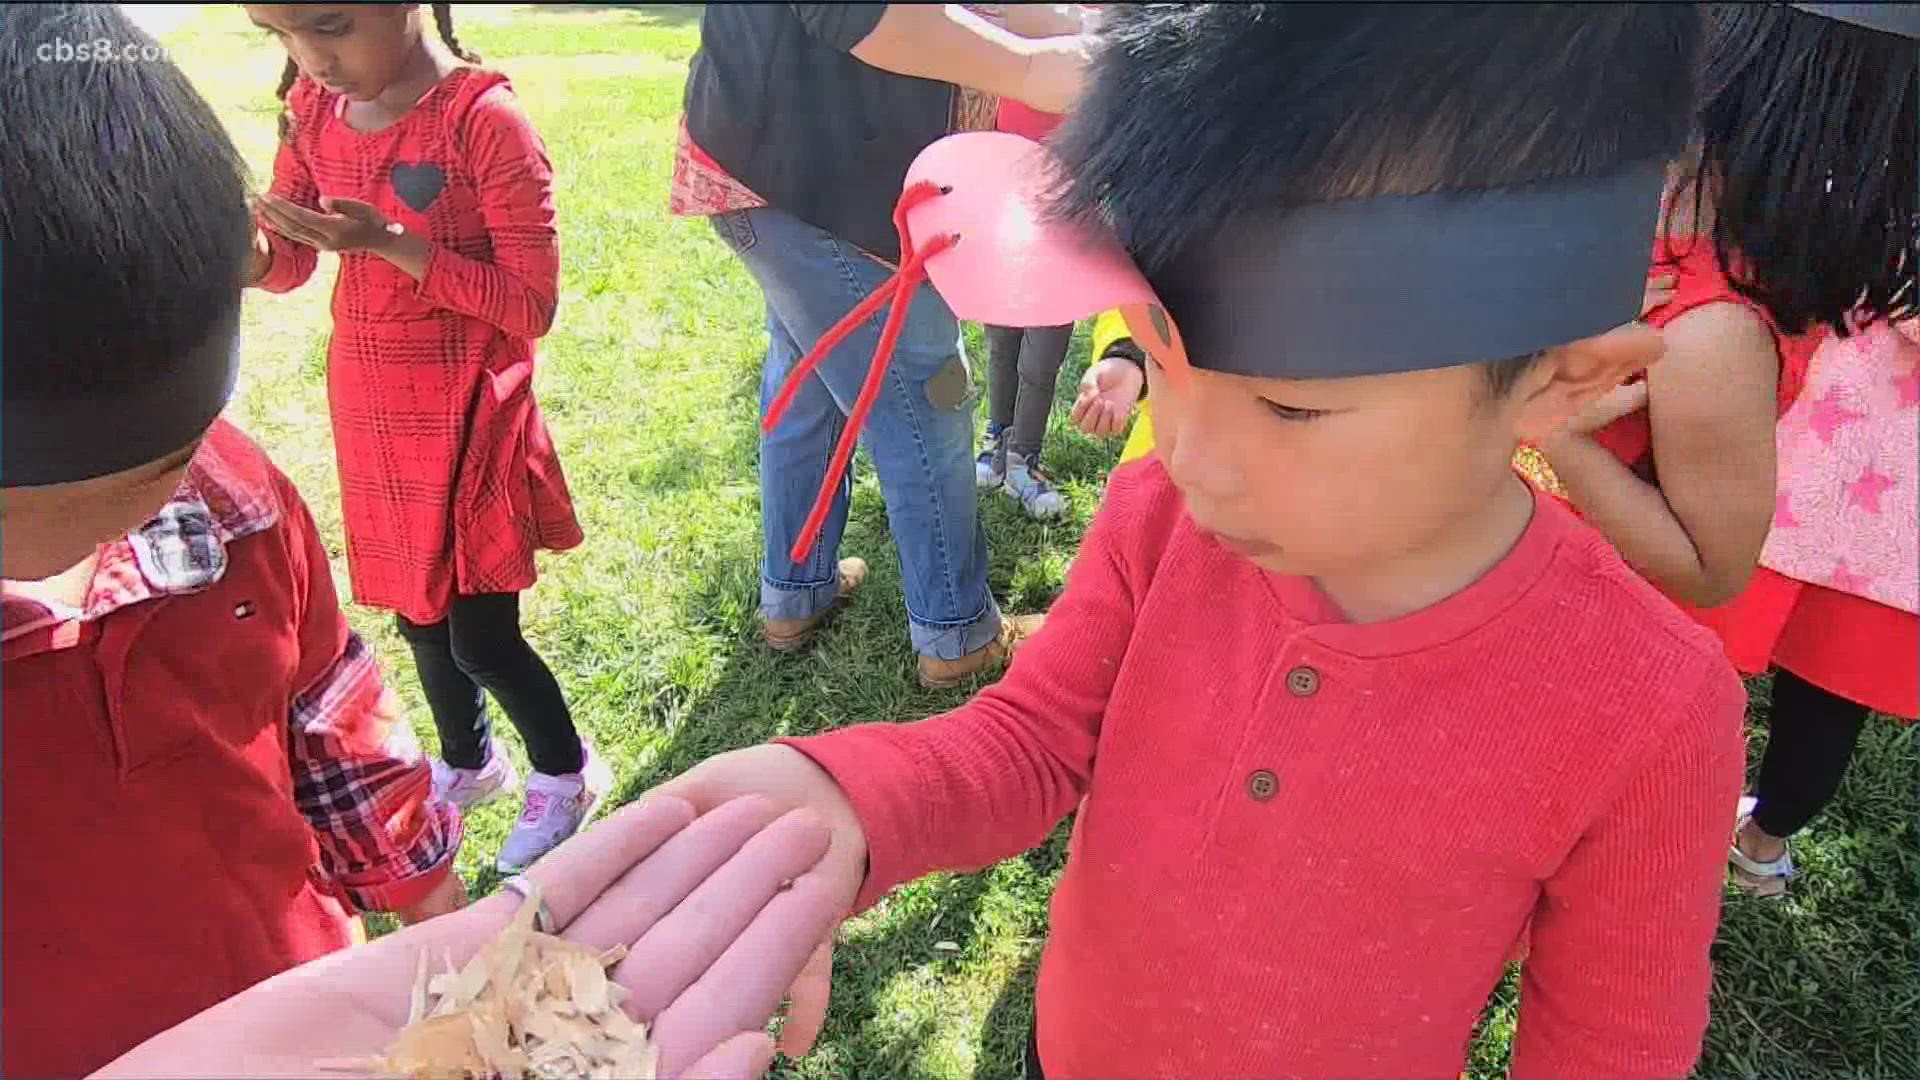 For preschoolers at Discovery Isle in the Scripps-Poway area, they released 12,000 ladybugs into their yard to celebrate 'Earth Day'.